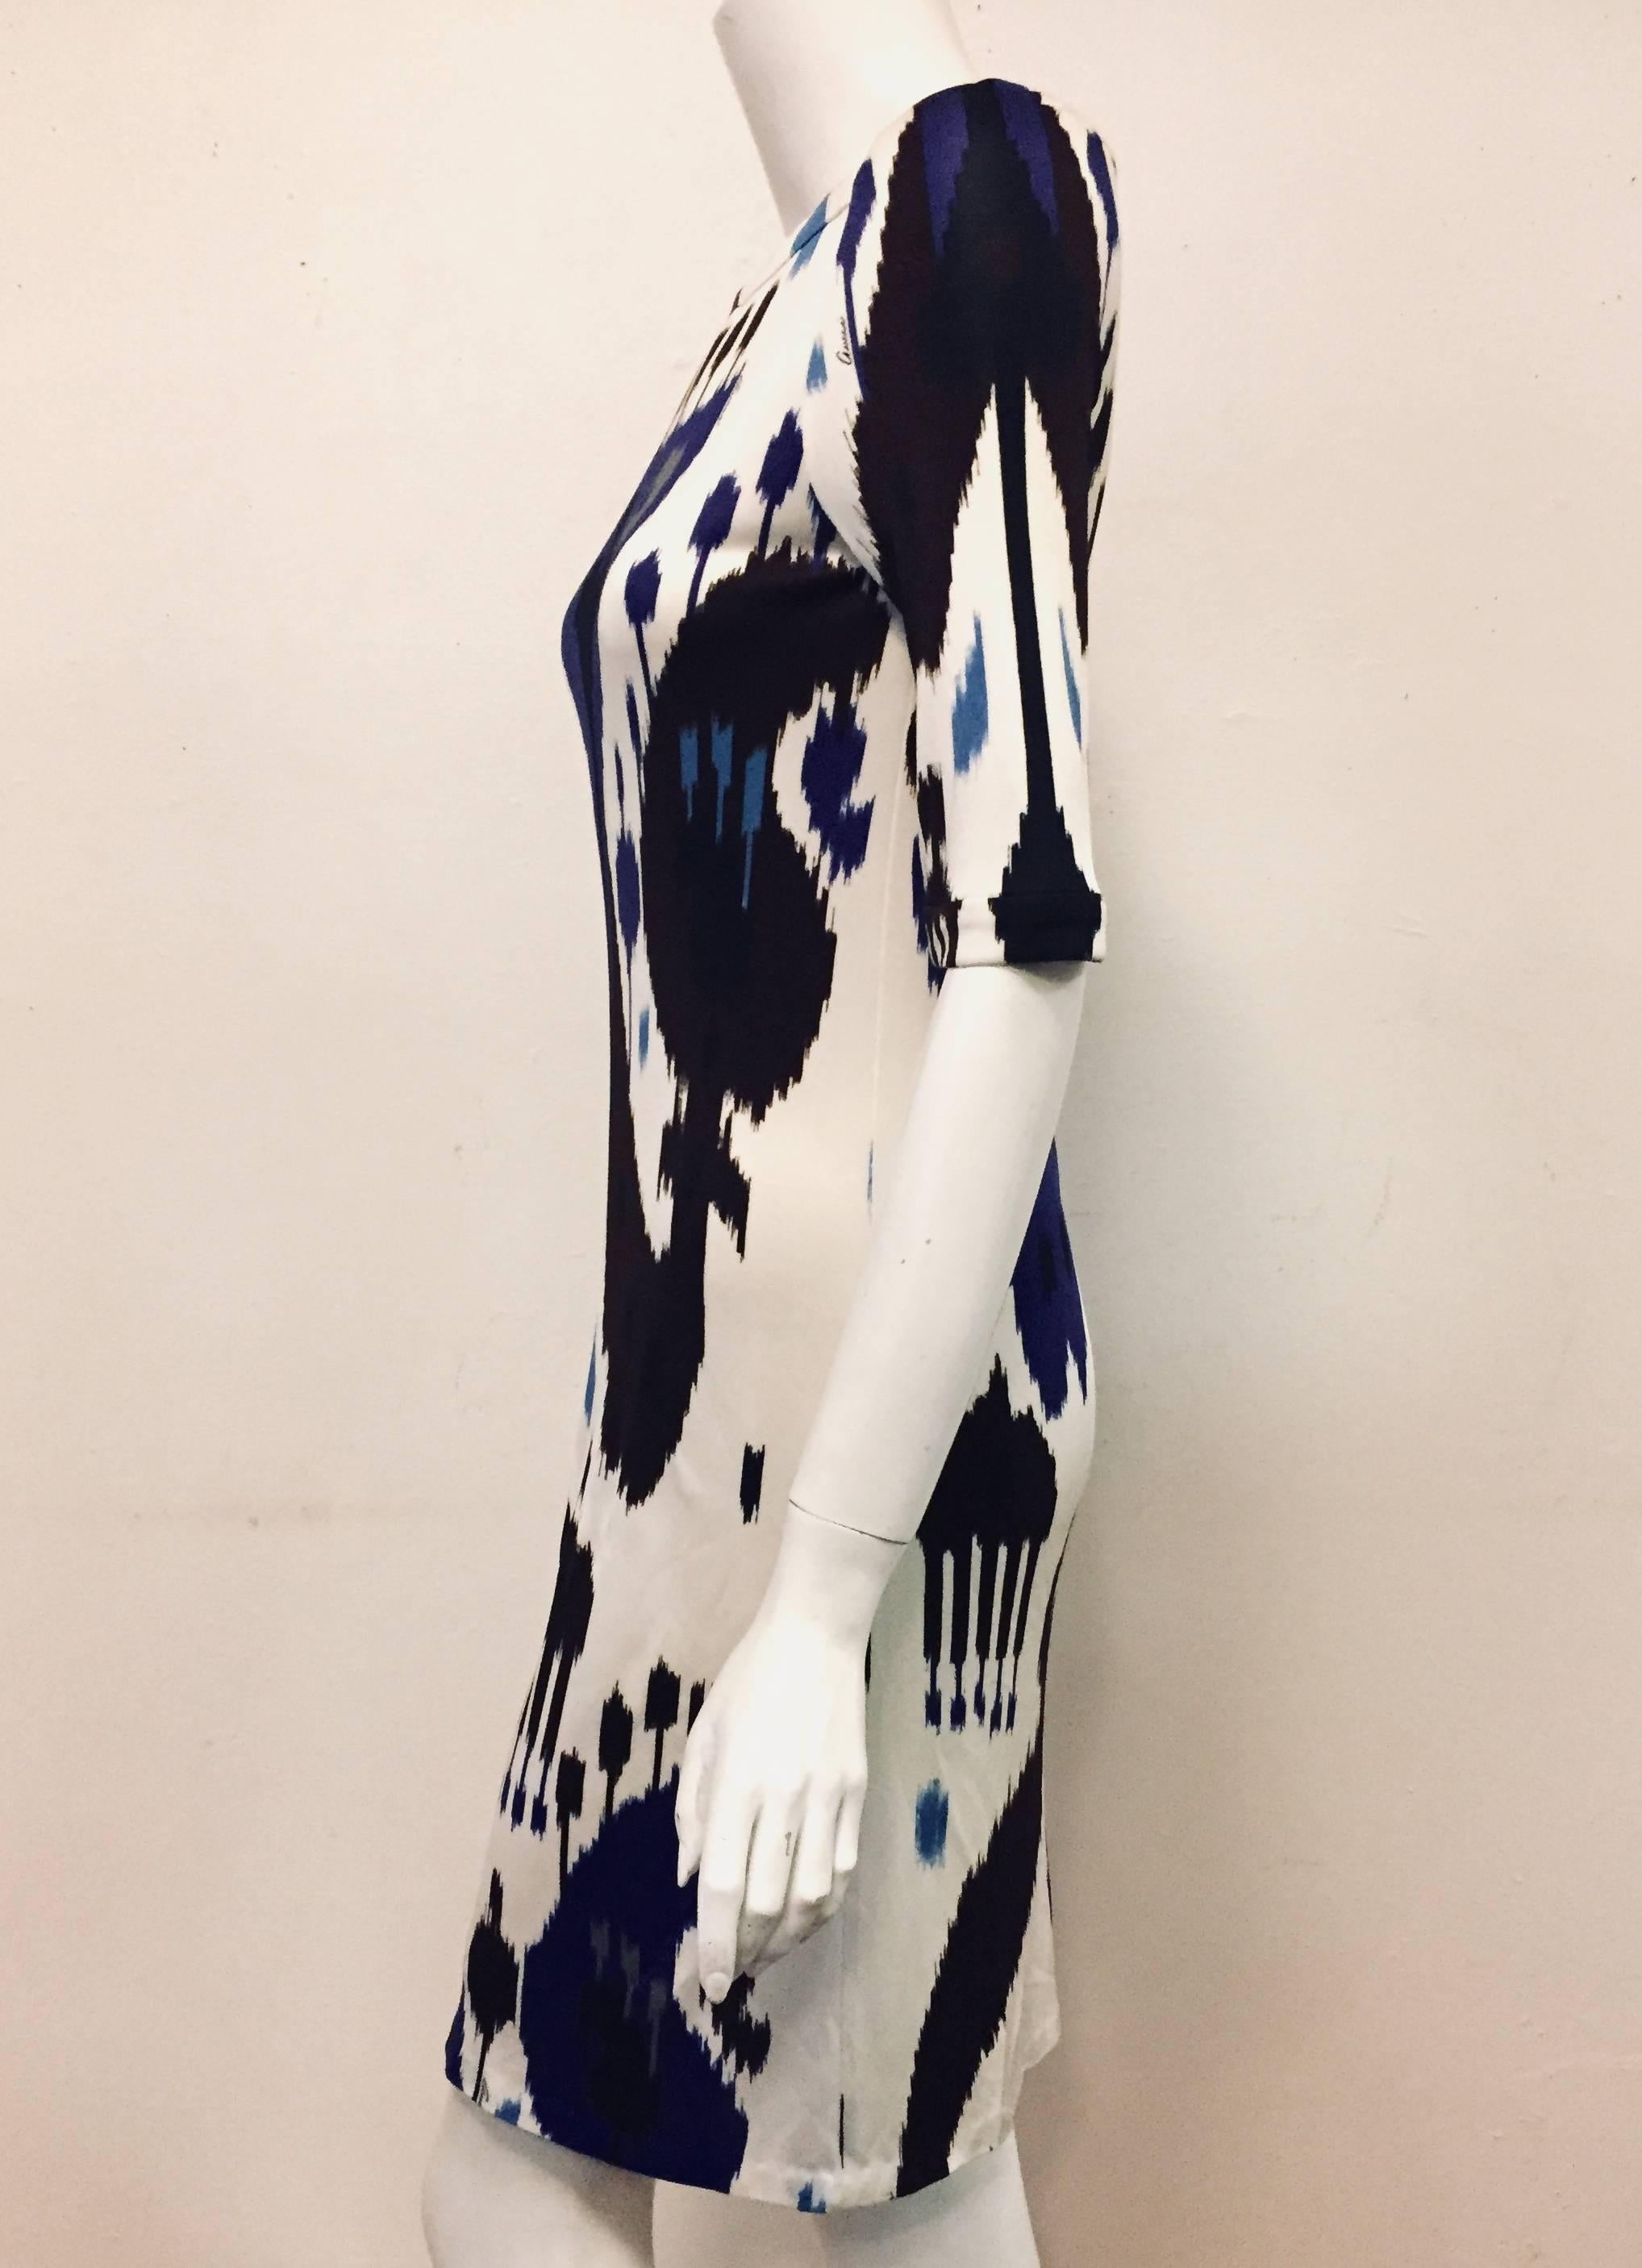 Gucci Blue, White and Black Ikat Tribal Print Silk Dress 42 EU In Good Condition For Sale In Palm Beach, FL